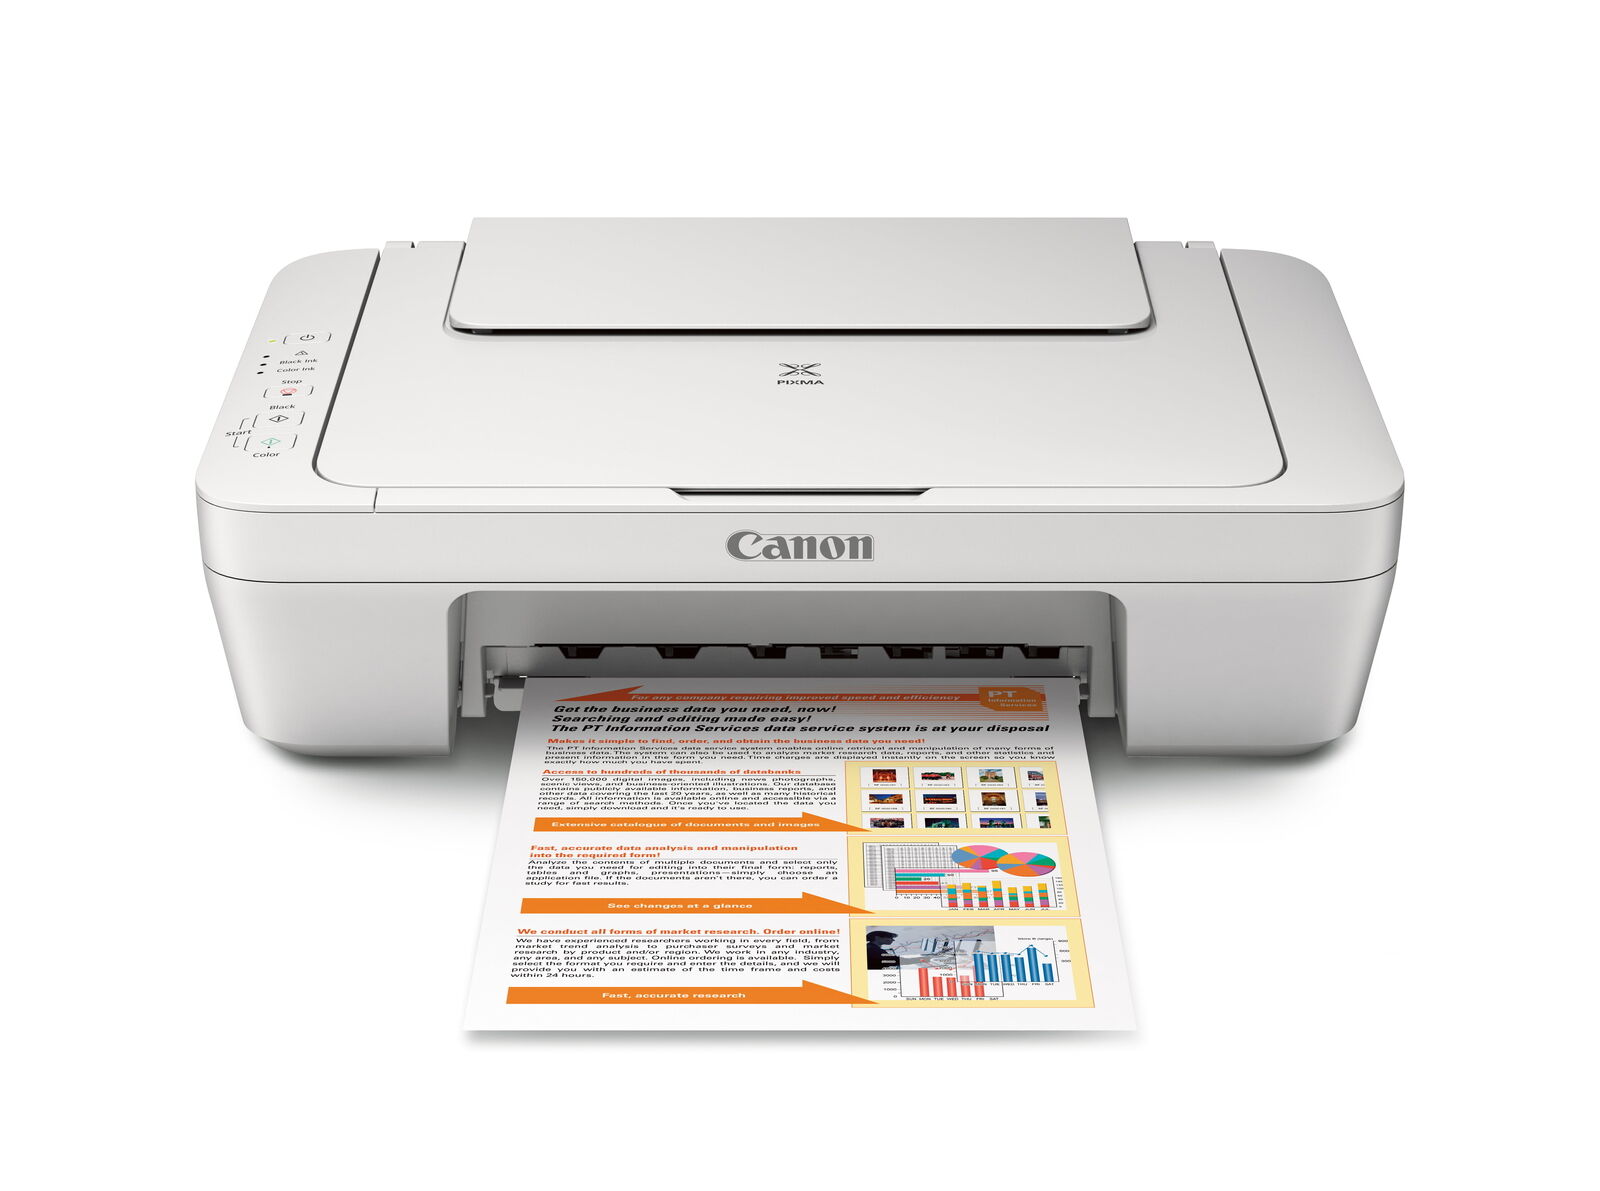 PIXMA MG2522 Wired All-in-One Color Inkjet Printer, USB Cable Included. Available Now for $25.99